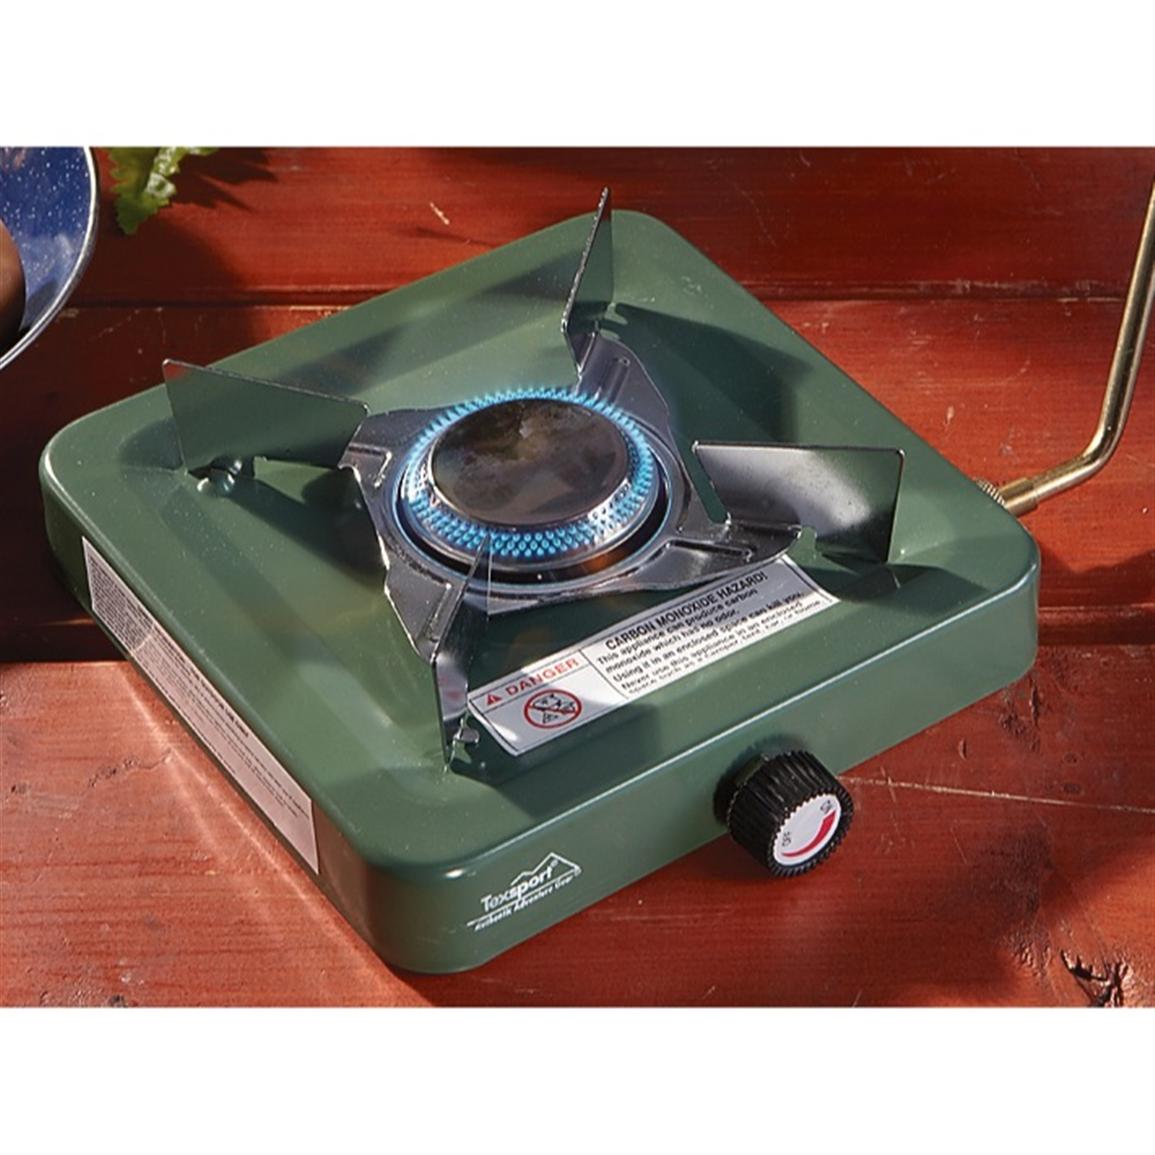 Texsport Compact Lightweight Single Burner Propane Stove for Outdoor Camping 